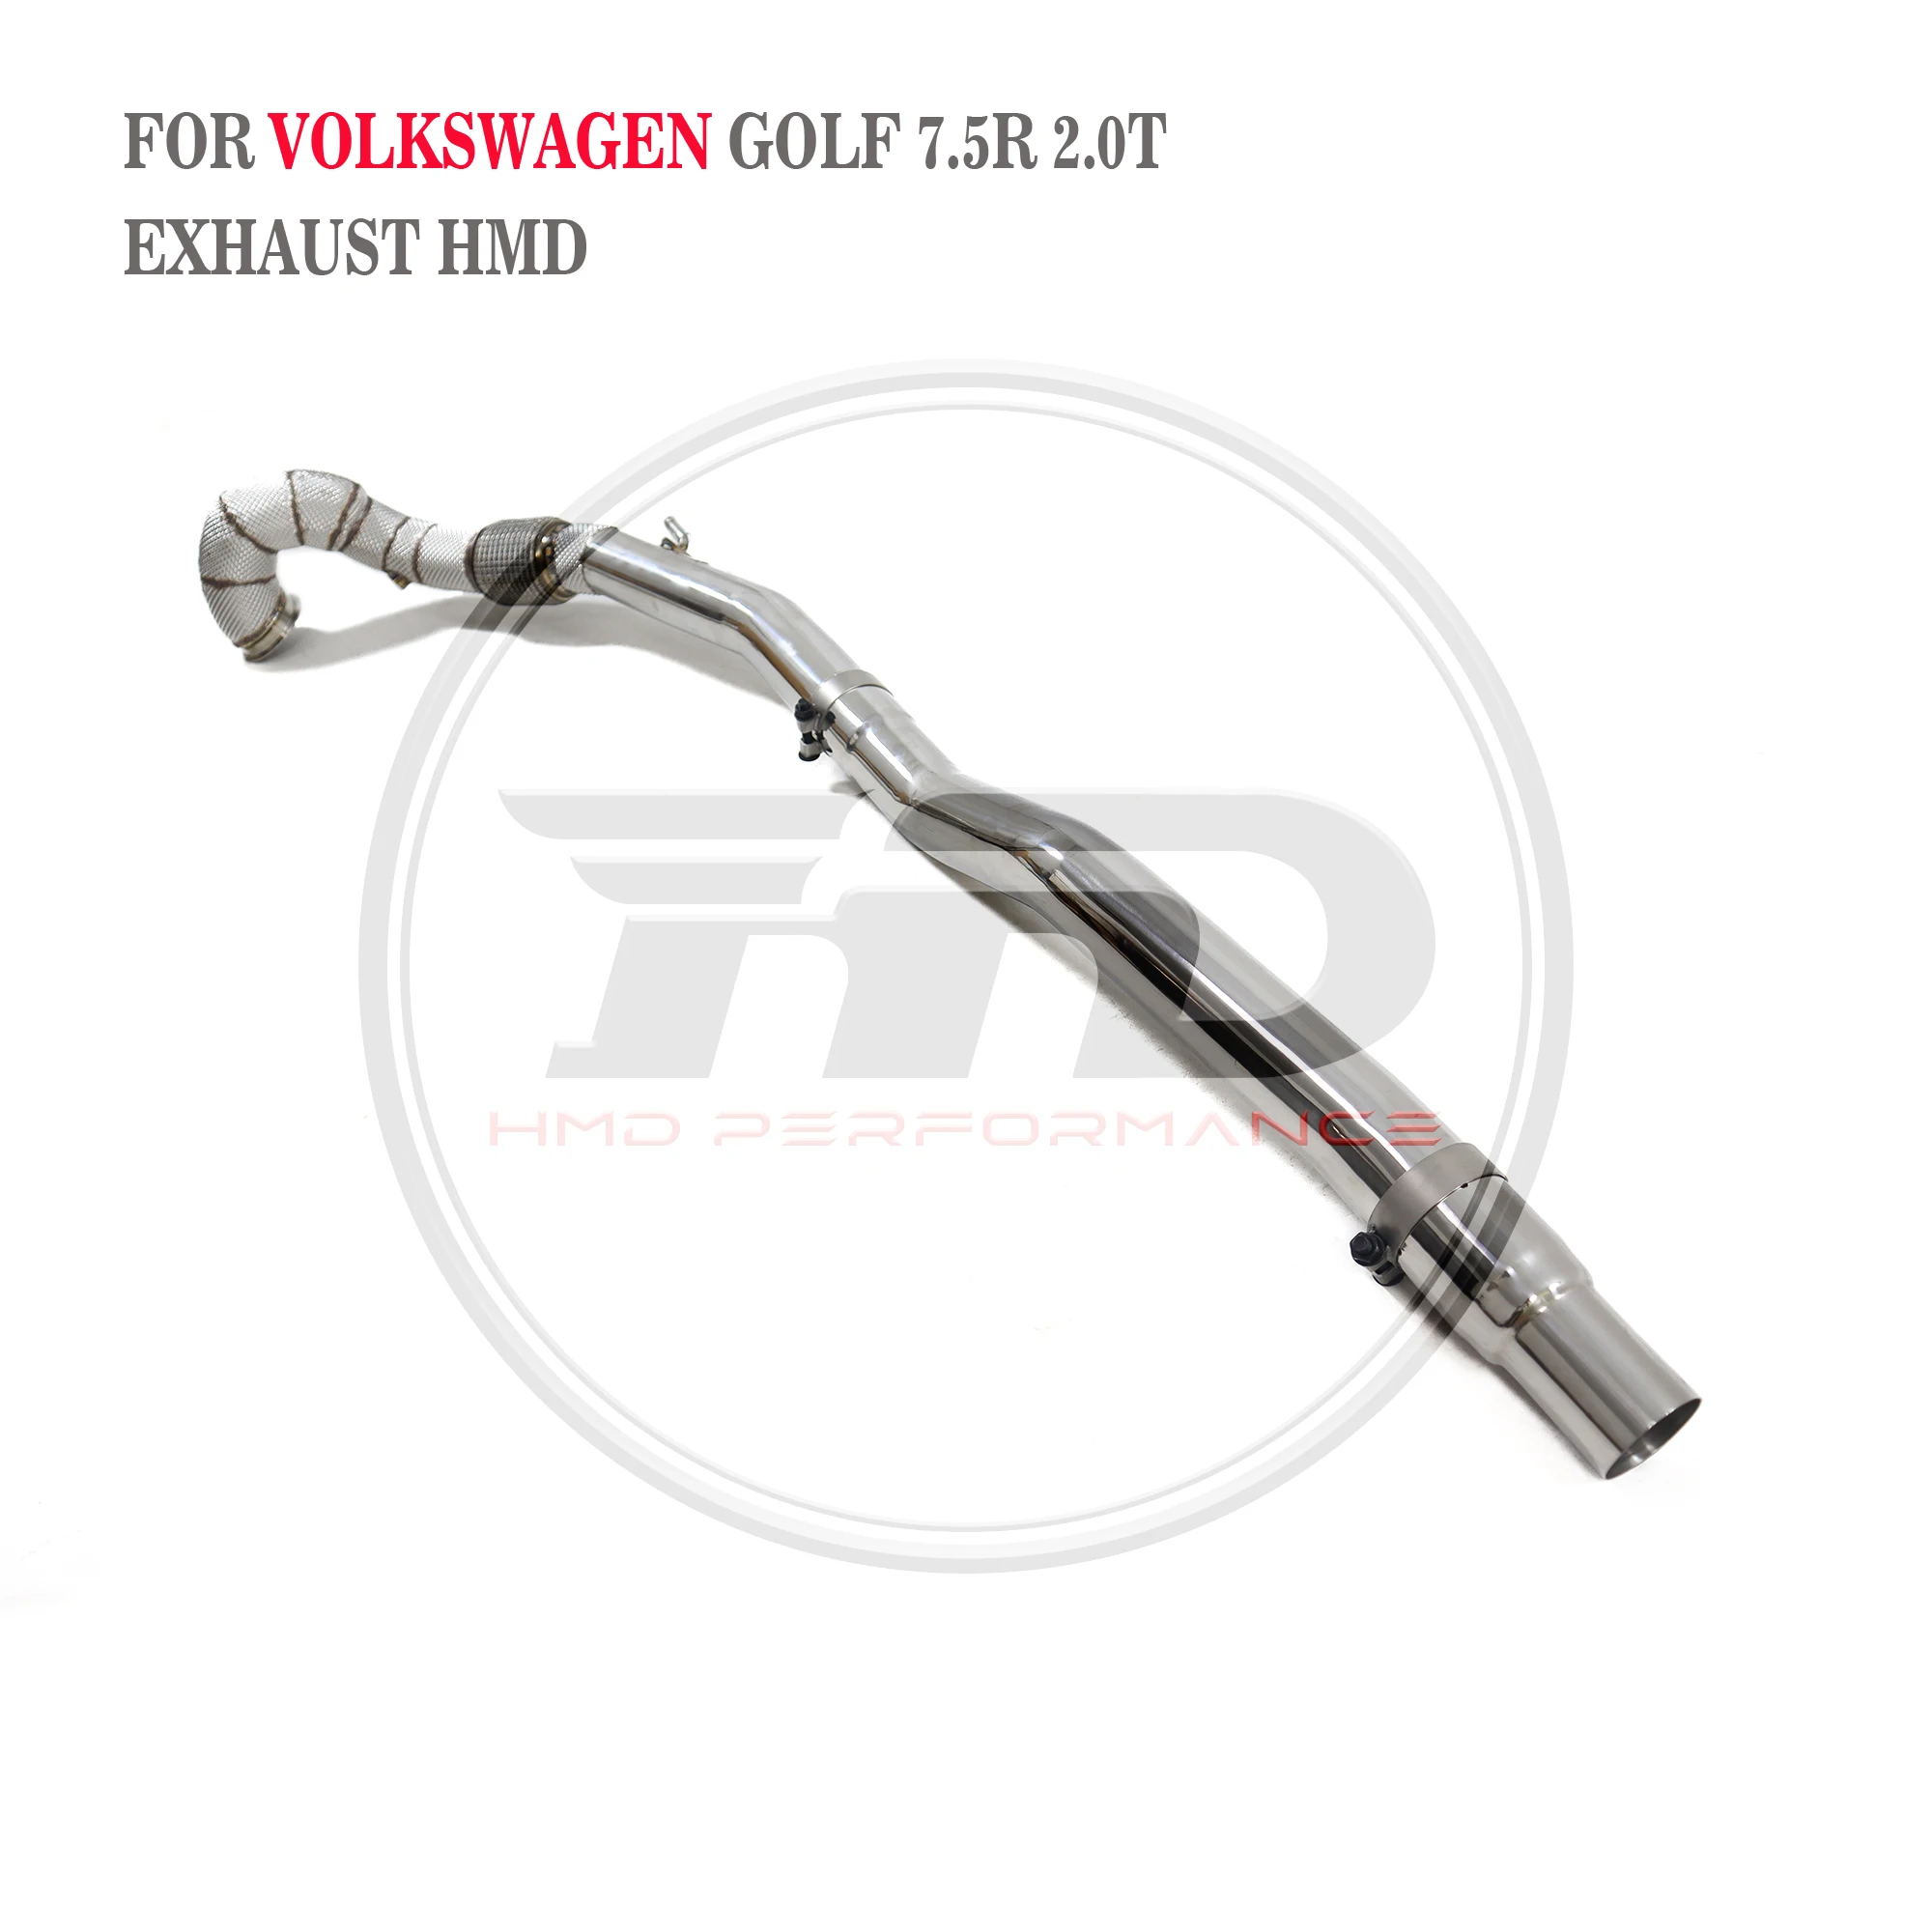 

HMD Exhaust System High Flow Performance Downpipe for Volkswagen Golf R MK7.5 2.0T With Heat Shield Racing Pipe